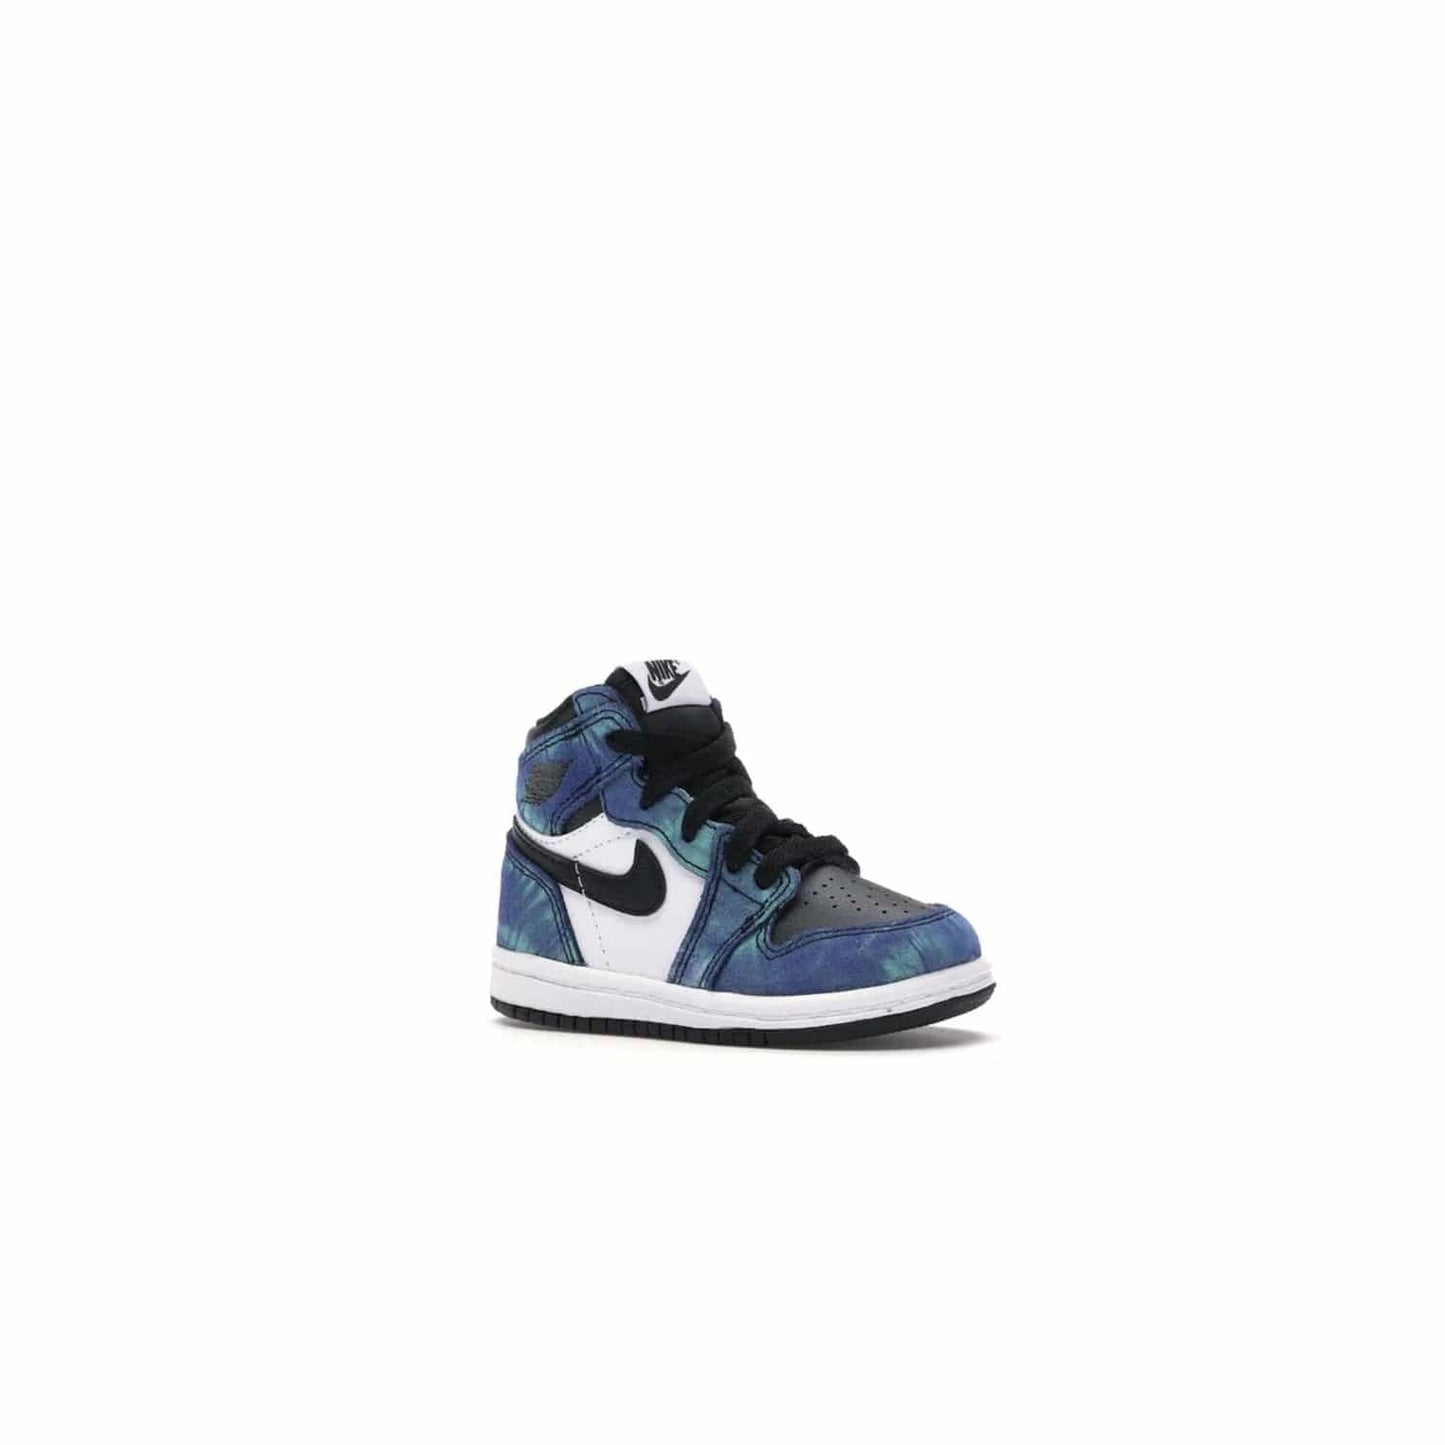 Jordan 1 Retro High Tie Dye (TD) - Image 4 - Only at www.BallersClubKickz.com - Add a unique twist to your sneaker collection with the Jordan 1 Retro High Tie Dye (TD). Classic Air Jordan 1 details like toe box perforations and the signature Swoosh logo on the sidewall are topped with an eye-catching tie dye design that’s perfect for styling all year round.